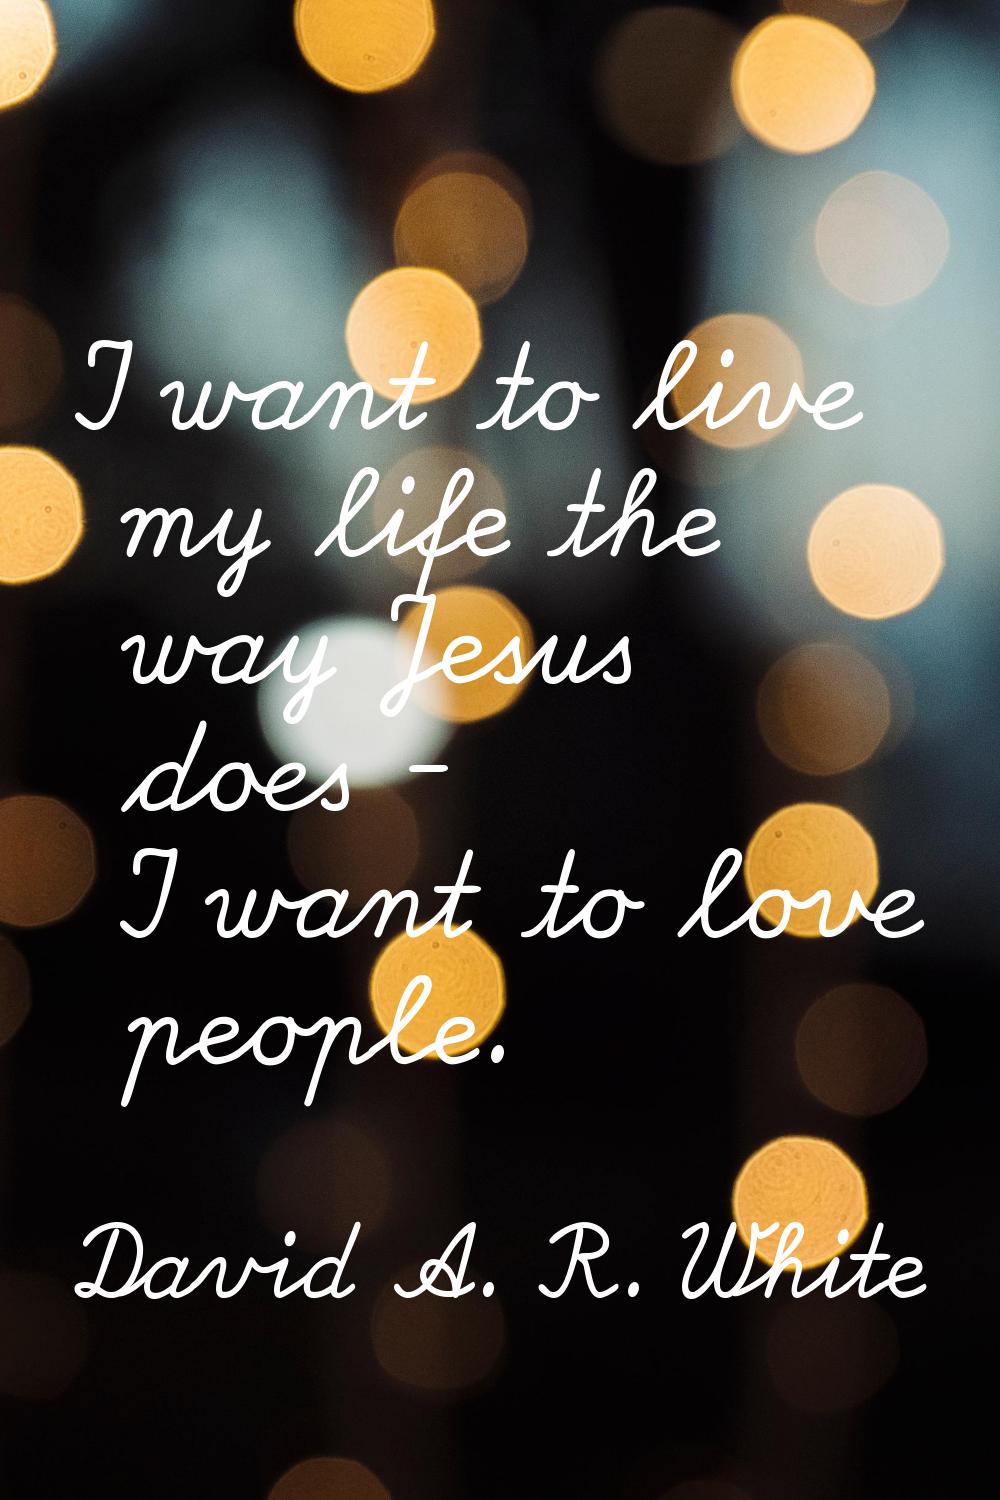 I want to live my life the way Jesus does - I want to love people.